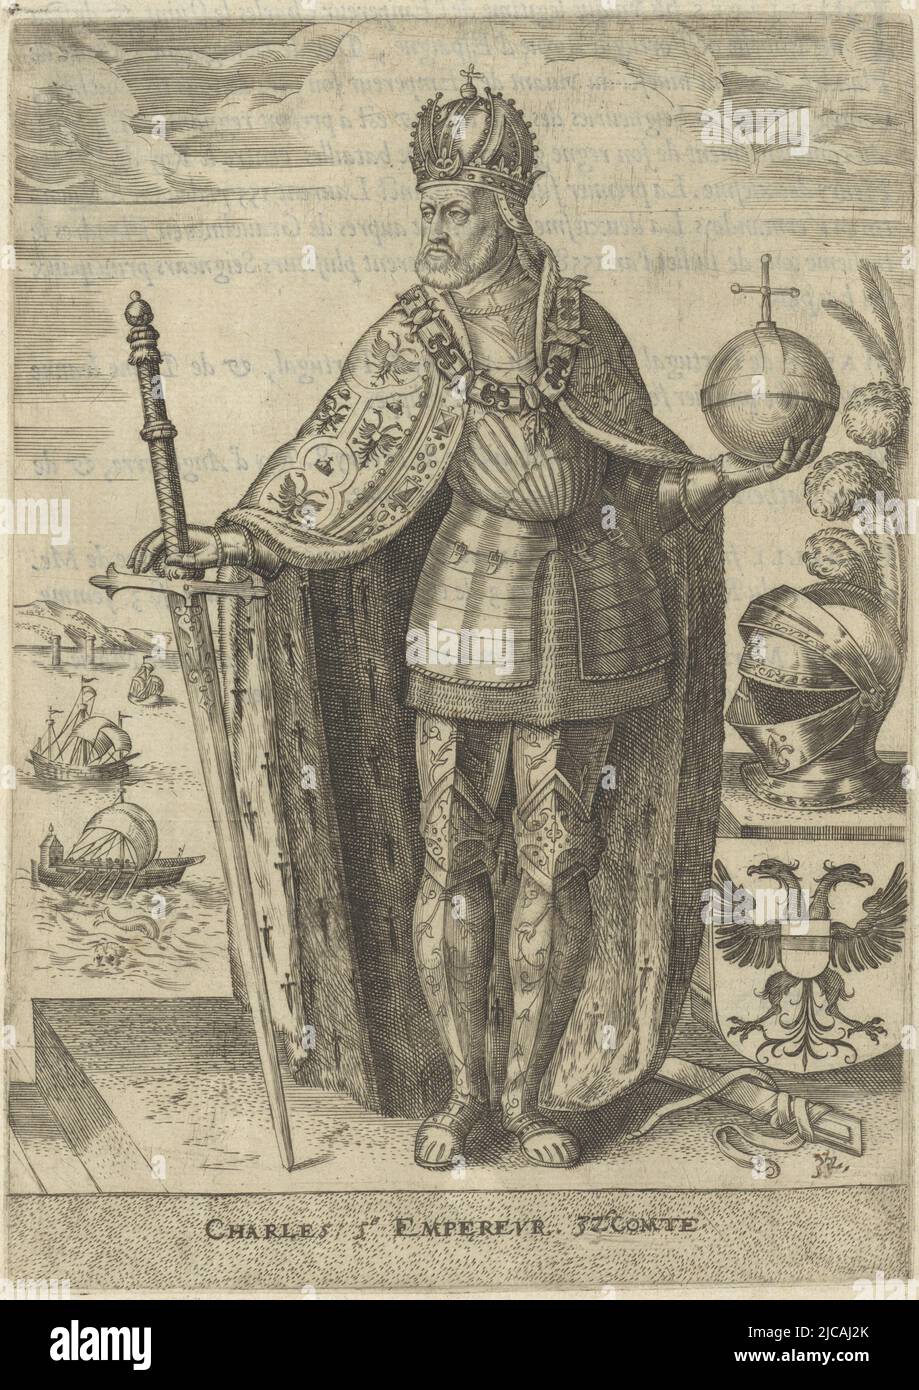 Portrait of Emperor Charles V, wearing crown and richly embroidered, fur-lined cloak In one hand he holds a large sword, in the other an imperial apple He is standing next to a pedestal, on which lies the helmet of his armor The pedestal is decorated with his coat of arms The background offers a view of the sea, with ships and a dolphin Above the print in letterpress 'Le trentdeuxiesme conte de Flandre' and indication of page number 117 and hangman's signature Q2, Portrait of Charles V of Habsburg, German Emperor, King of Spain Charles, 5th Empereur, 32nd Comte , print maker: unknown Stock Photo